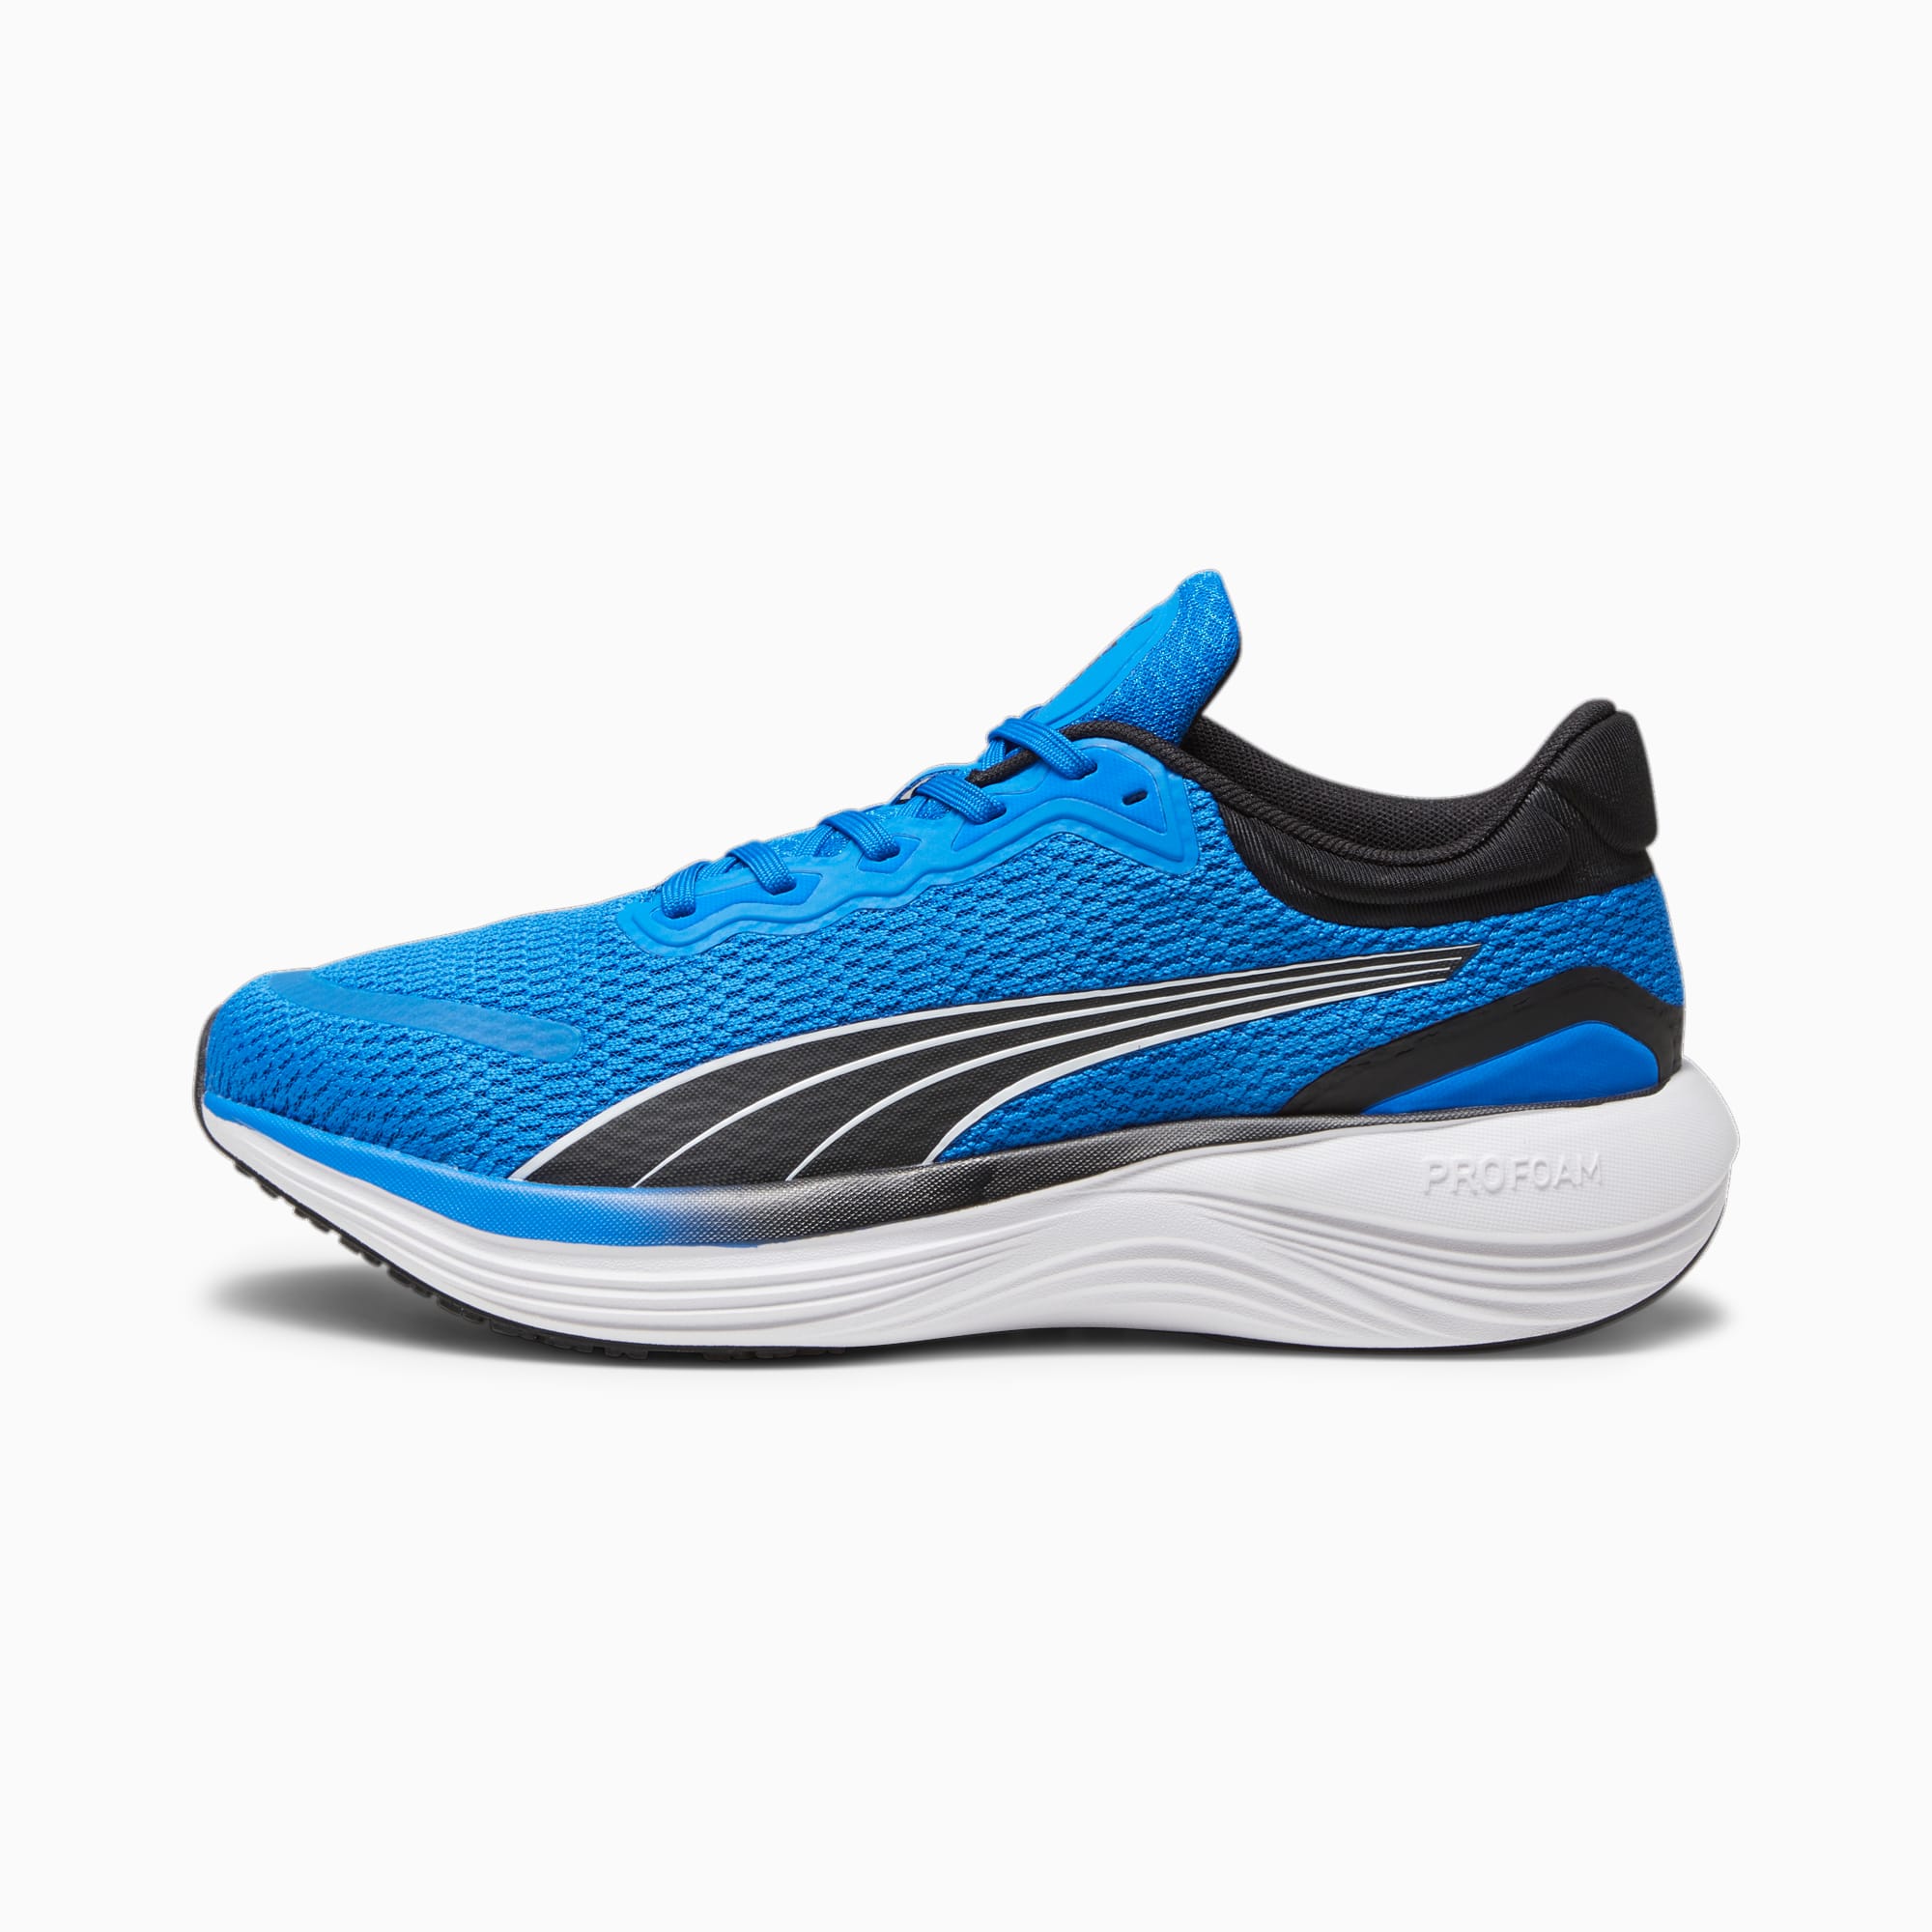 Women's PUMA Scend Pro Running Shoes, Ultra Blue/Black/White, Size 35,5, Shoes